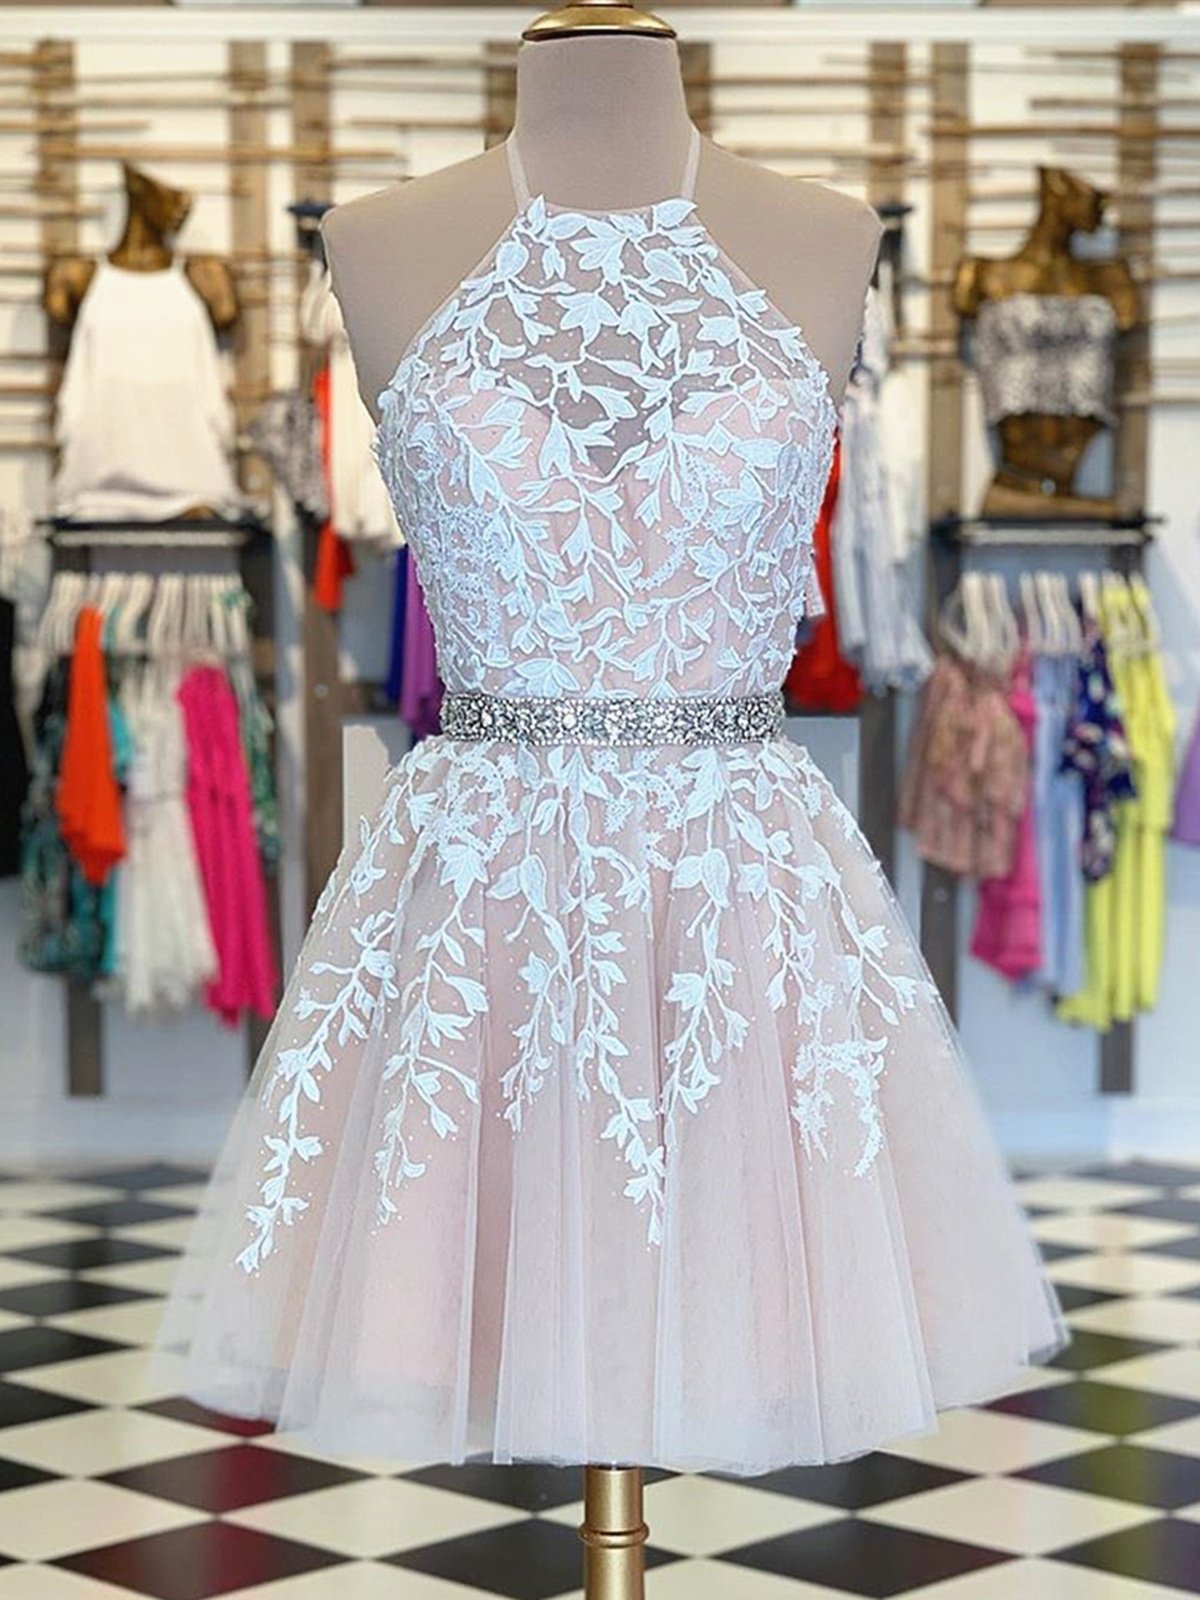 A Line Halter Neck Short Champagne Lace Prom Dresses, Short Champagne Lace Formal Homecoming Dresses